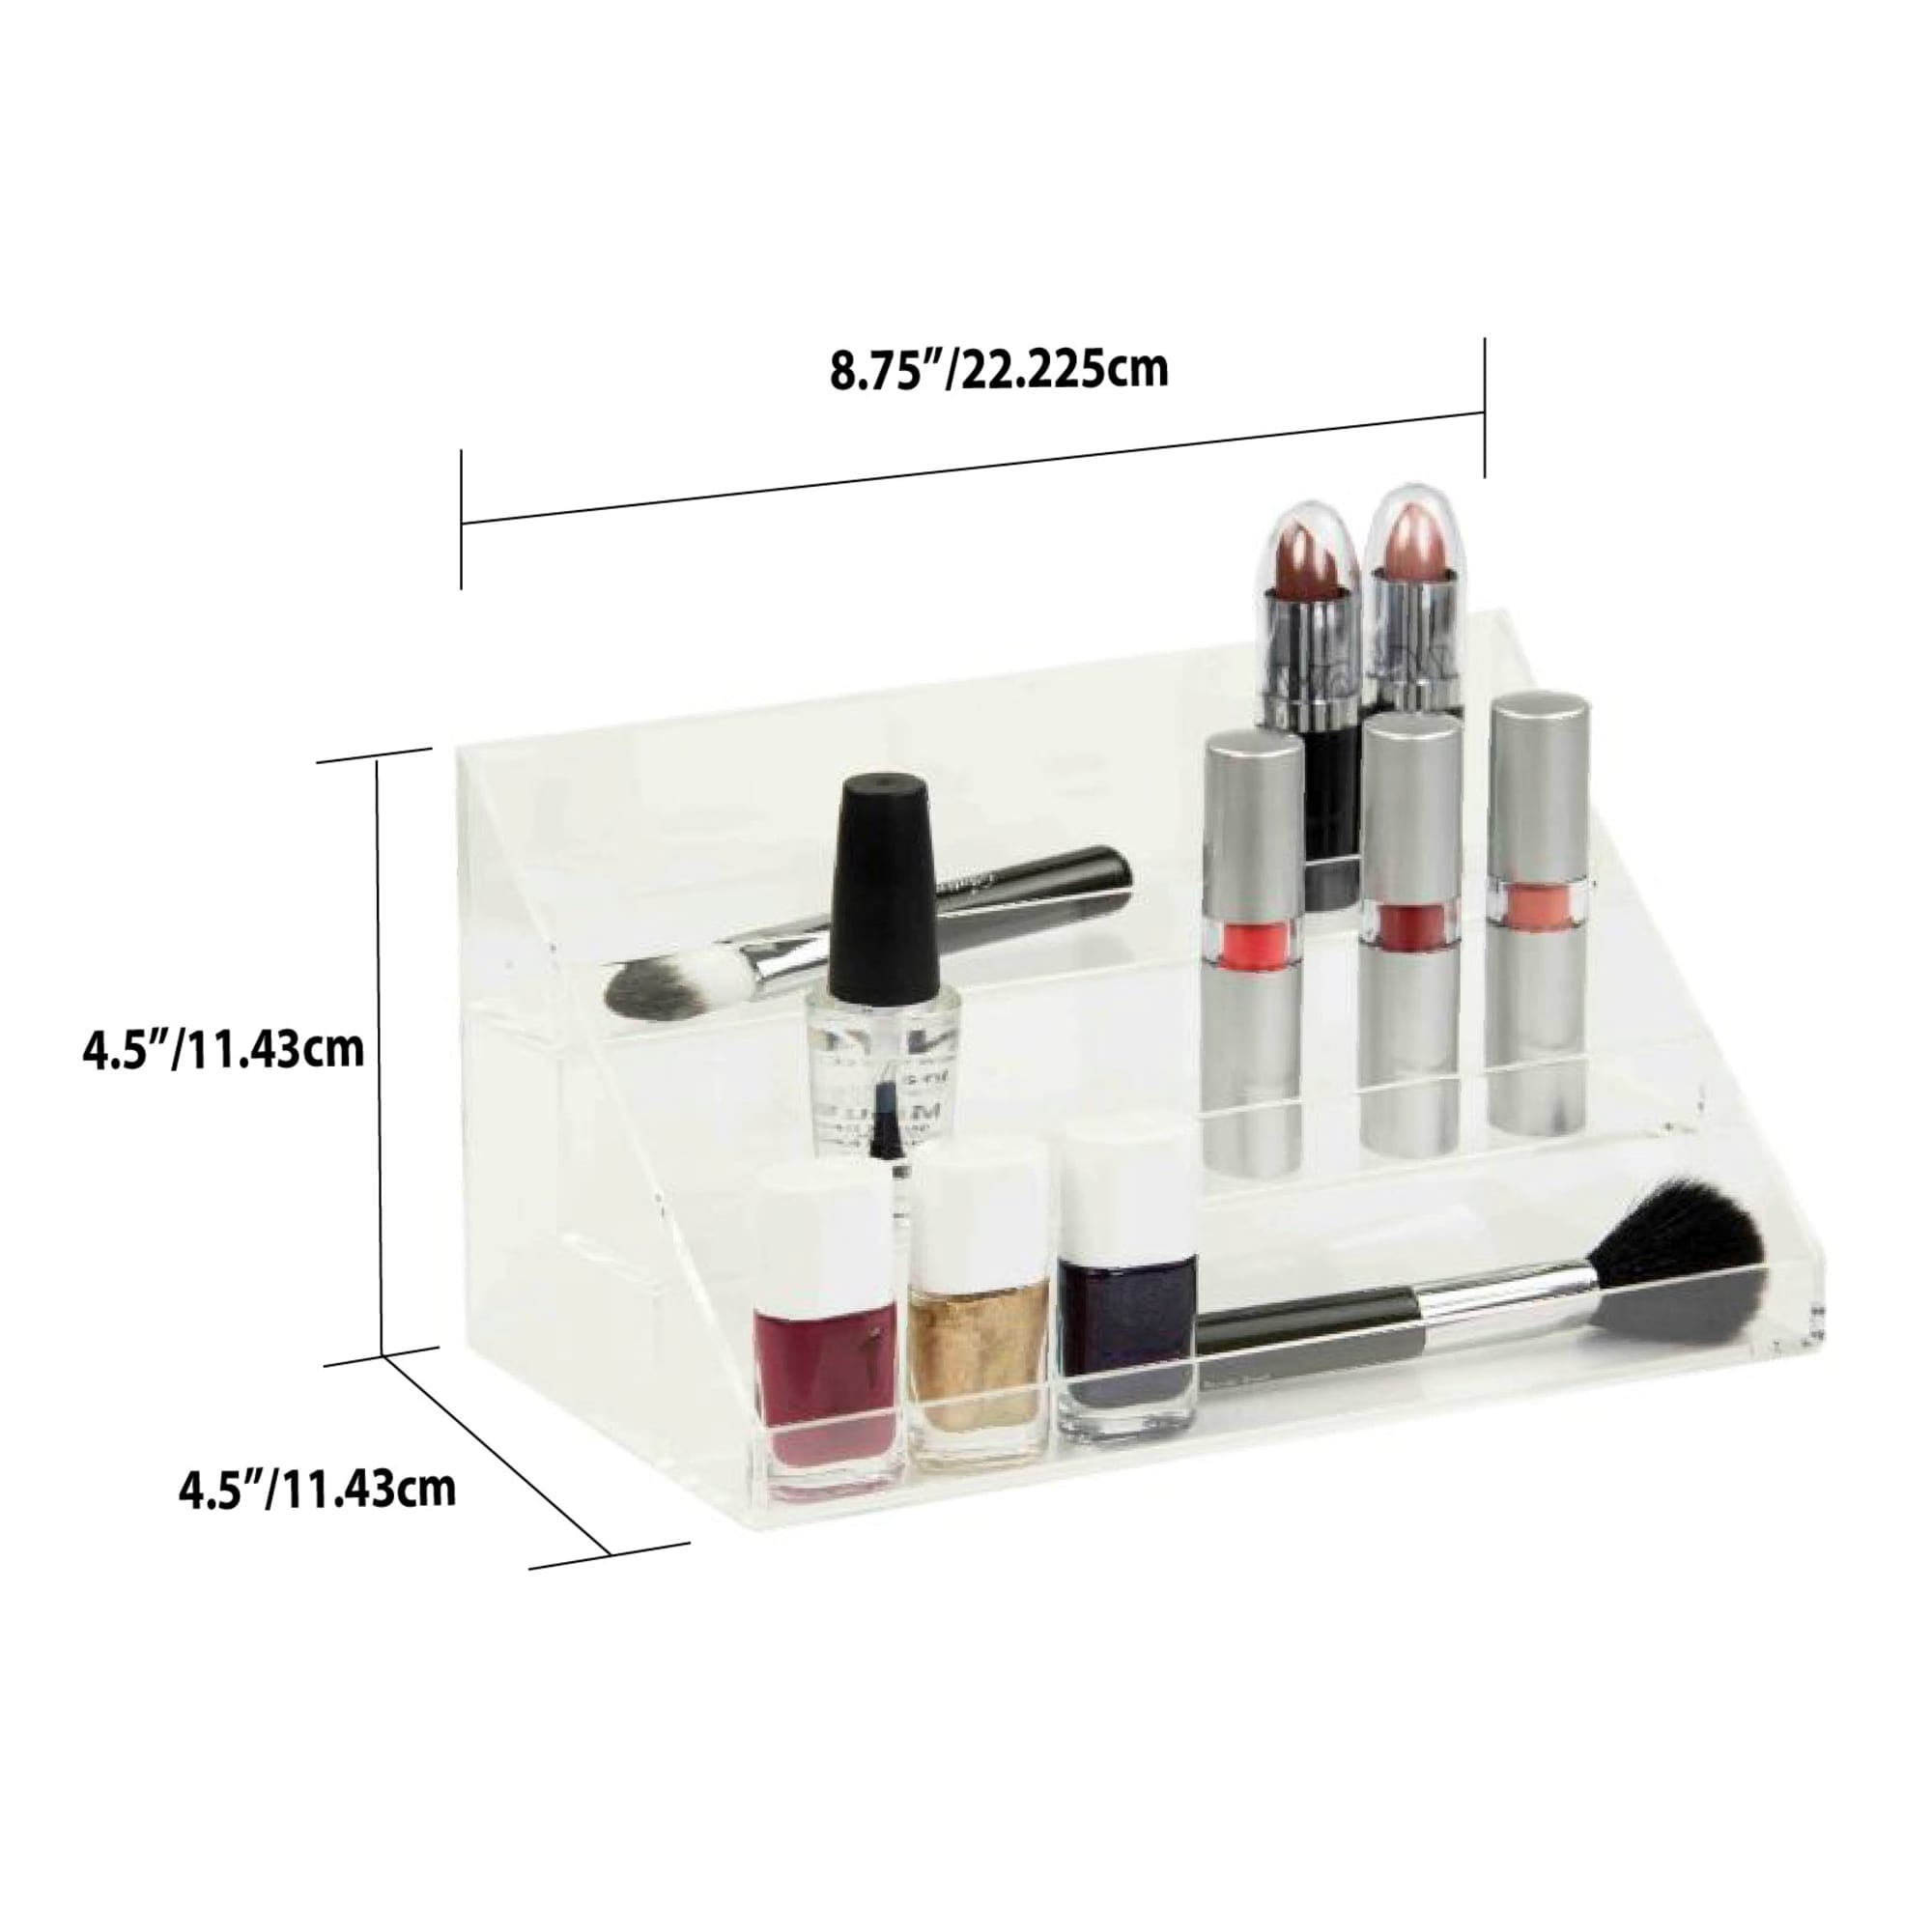 Home Basics 3 Tier Cosmetic Stand $2.5 EACH, CASE PACK OF 12